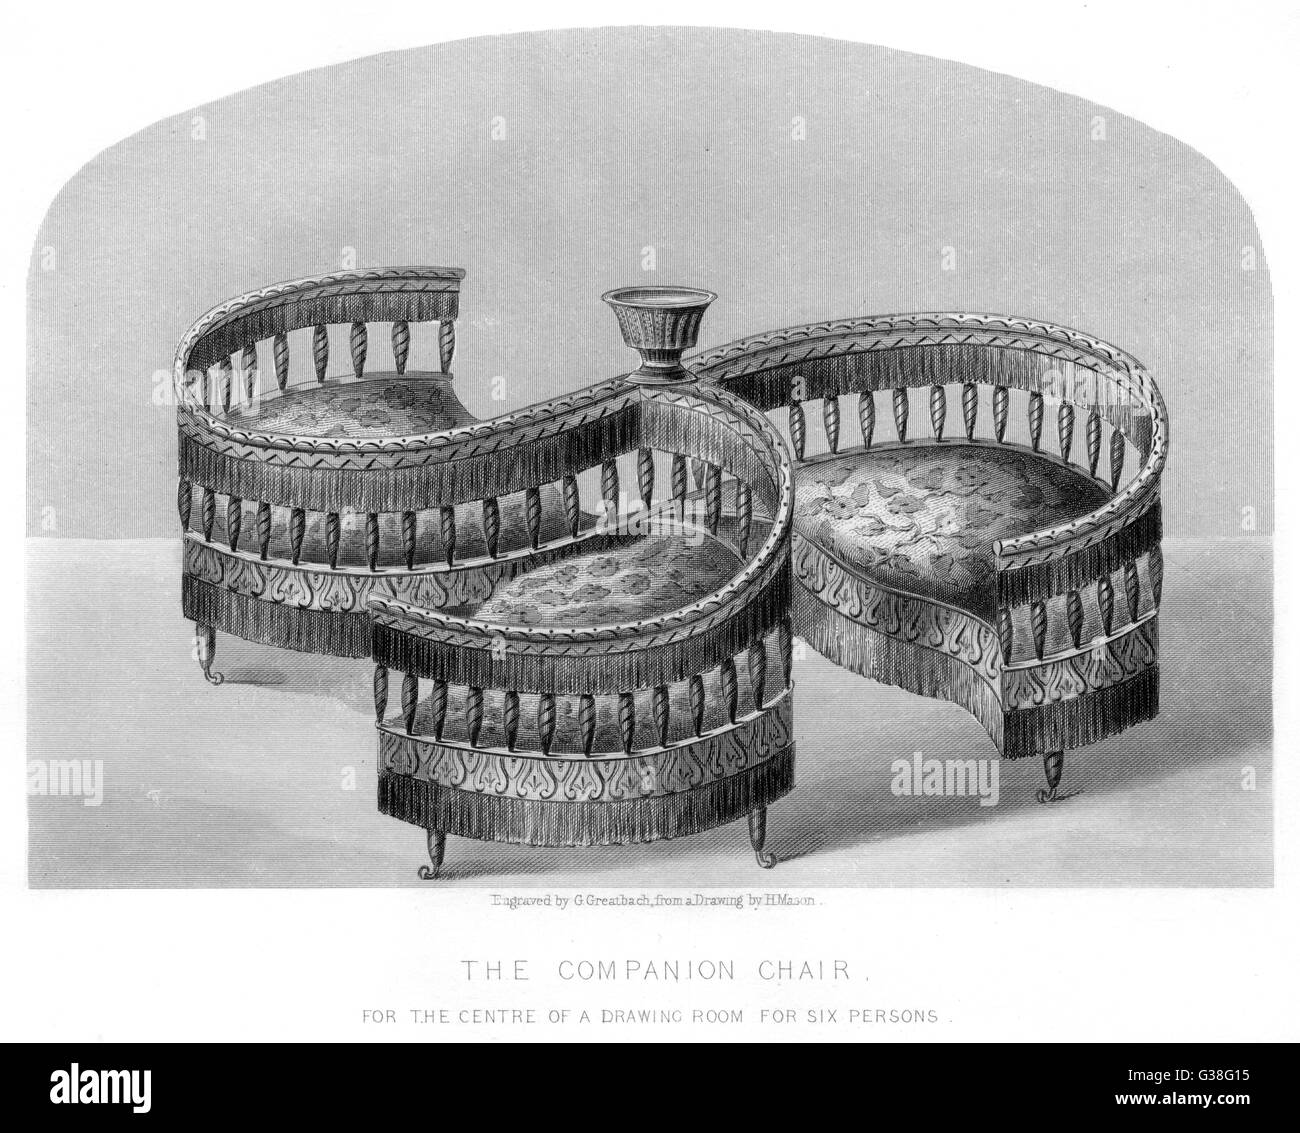 THE COMPANION CHAIR intended to six people, placed  at the centre of a drawing  room : exhibited at the  Crystal Palace exhibition      Date: 1851 Stock Photo